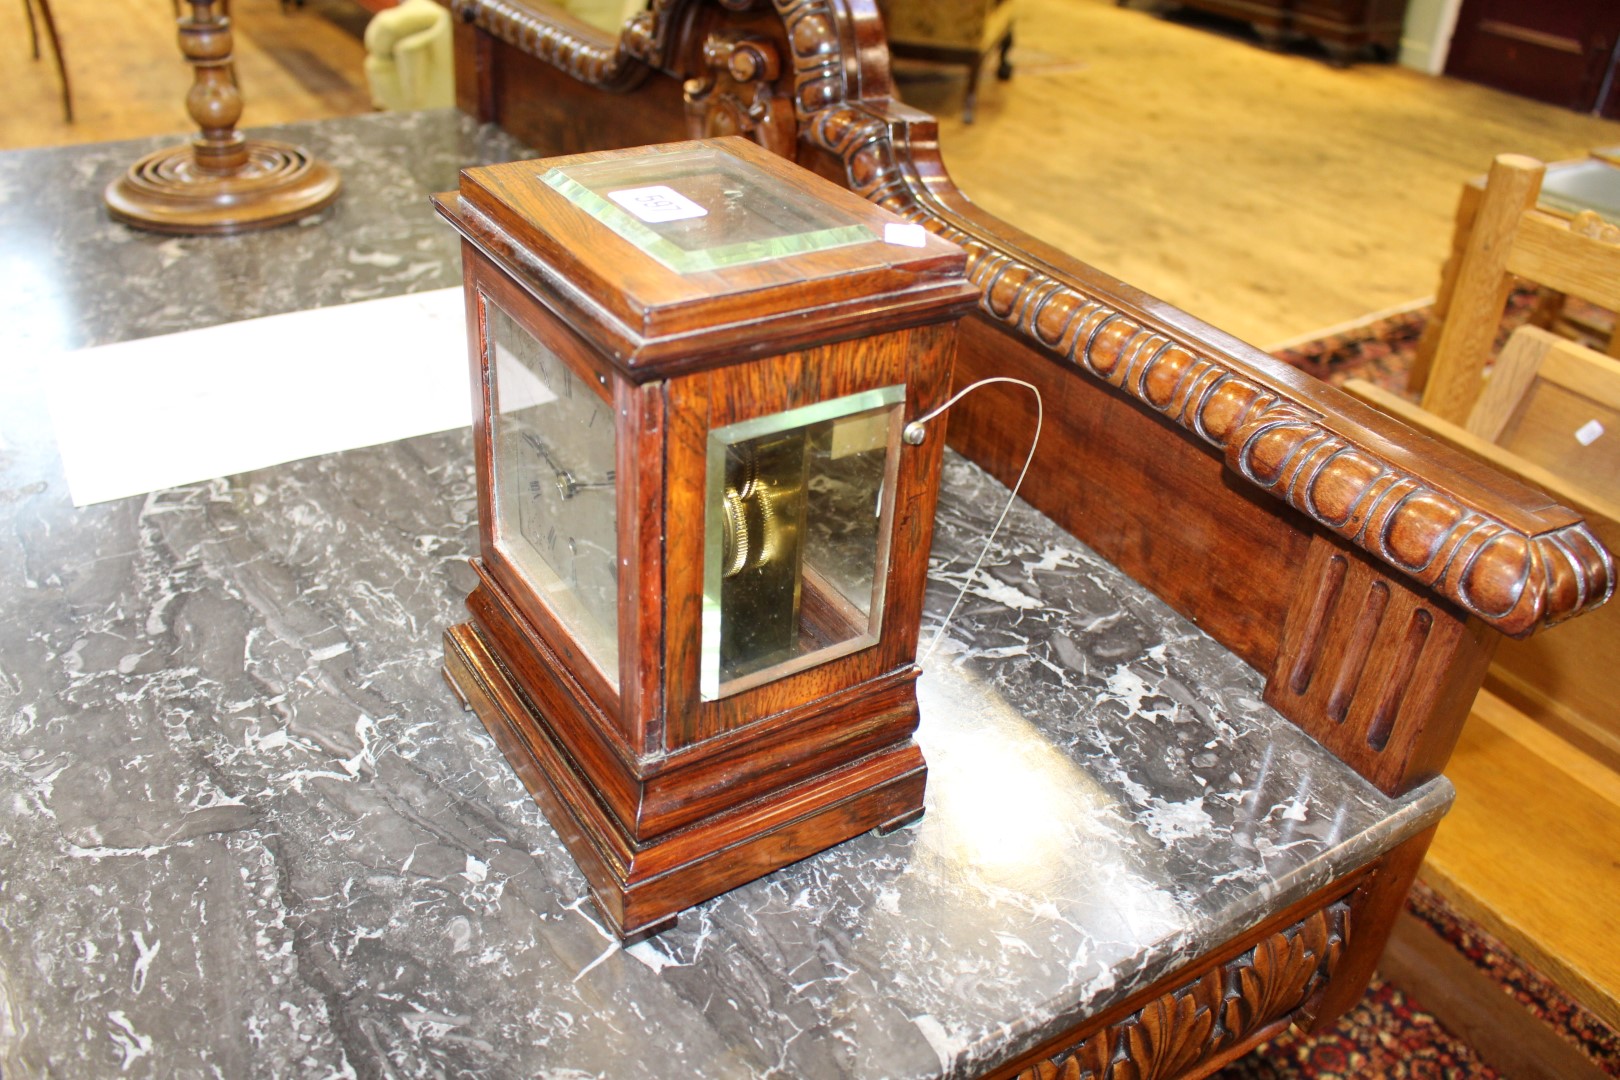 A ROSEWOOD MANTEL CLOCK, CIRCA 1850, with top and side bevelled viewing glasses, - Image 4 of 7